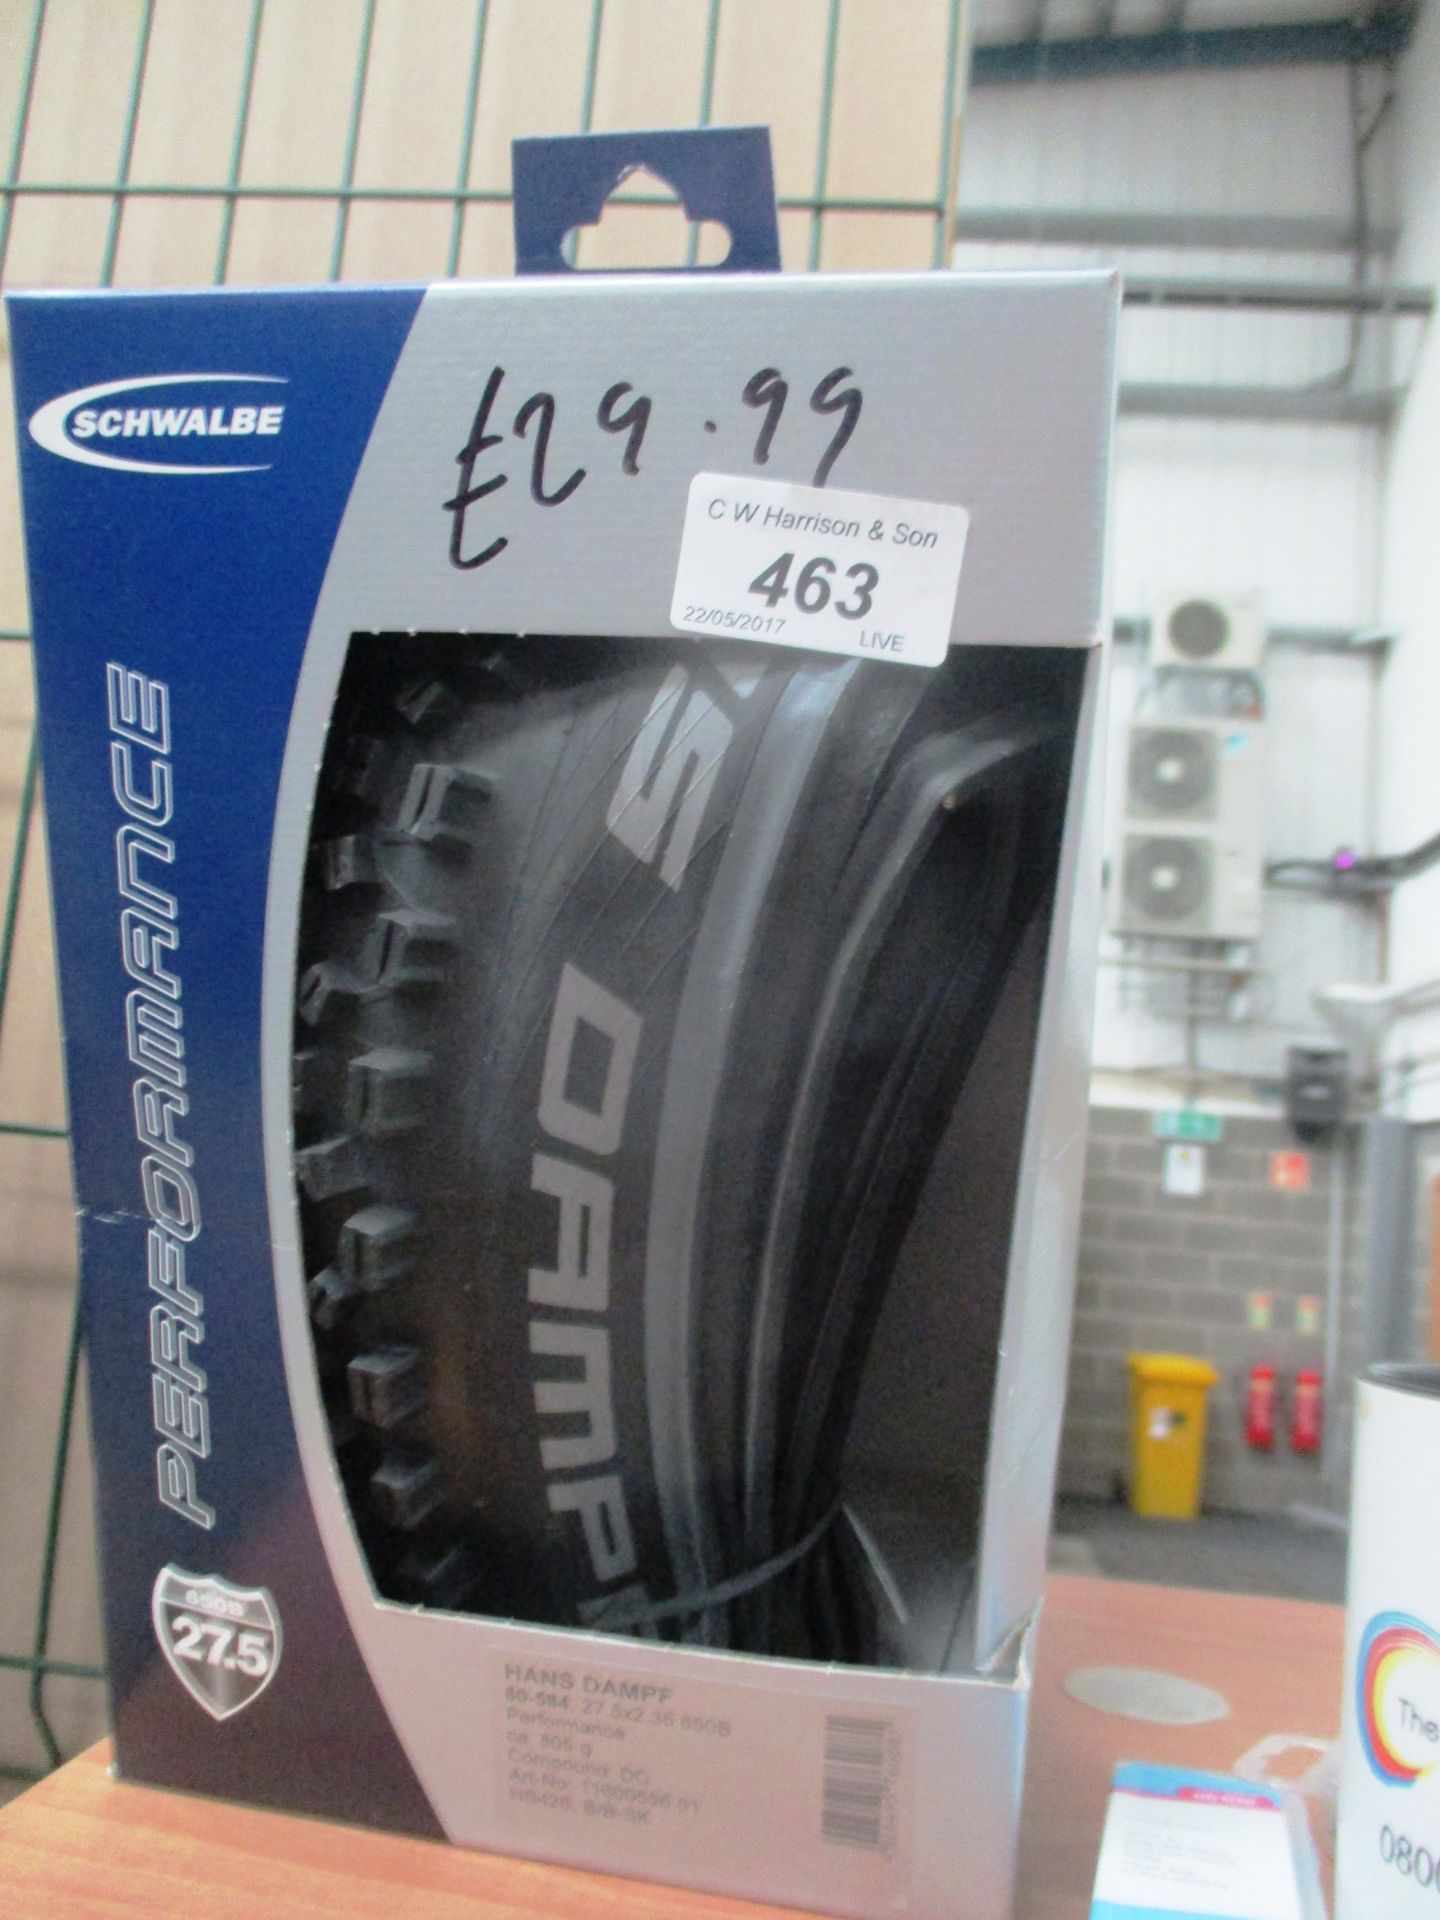 A pair of Schwalbe Performance Hans-Dampf 27.5tyres (RRP £29.